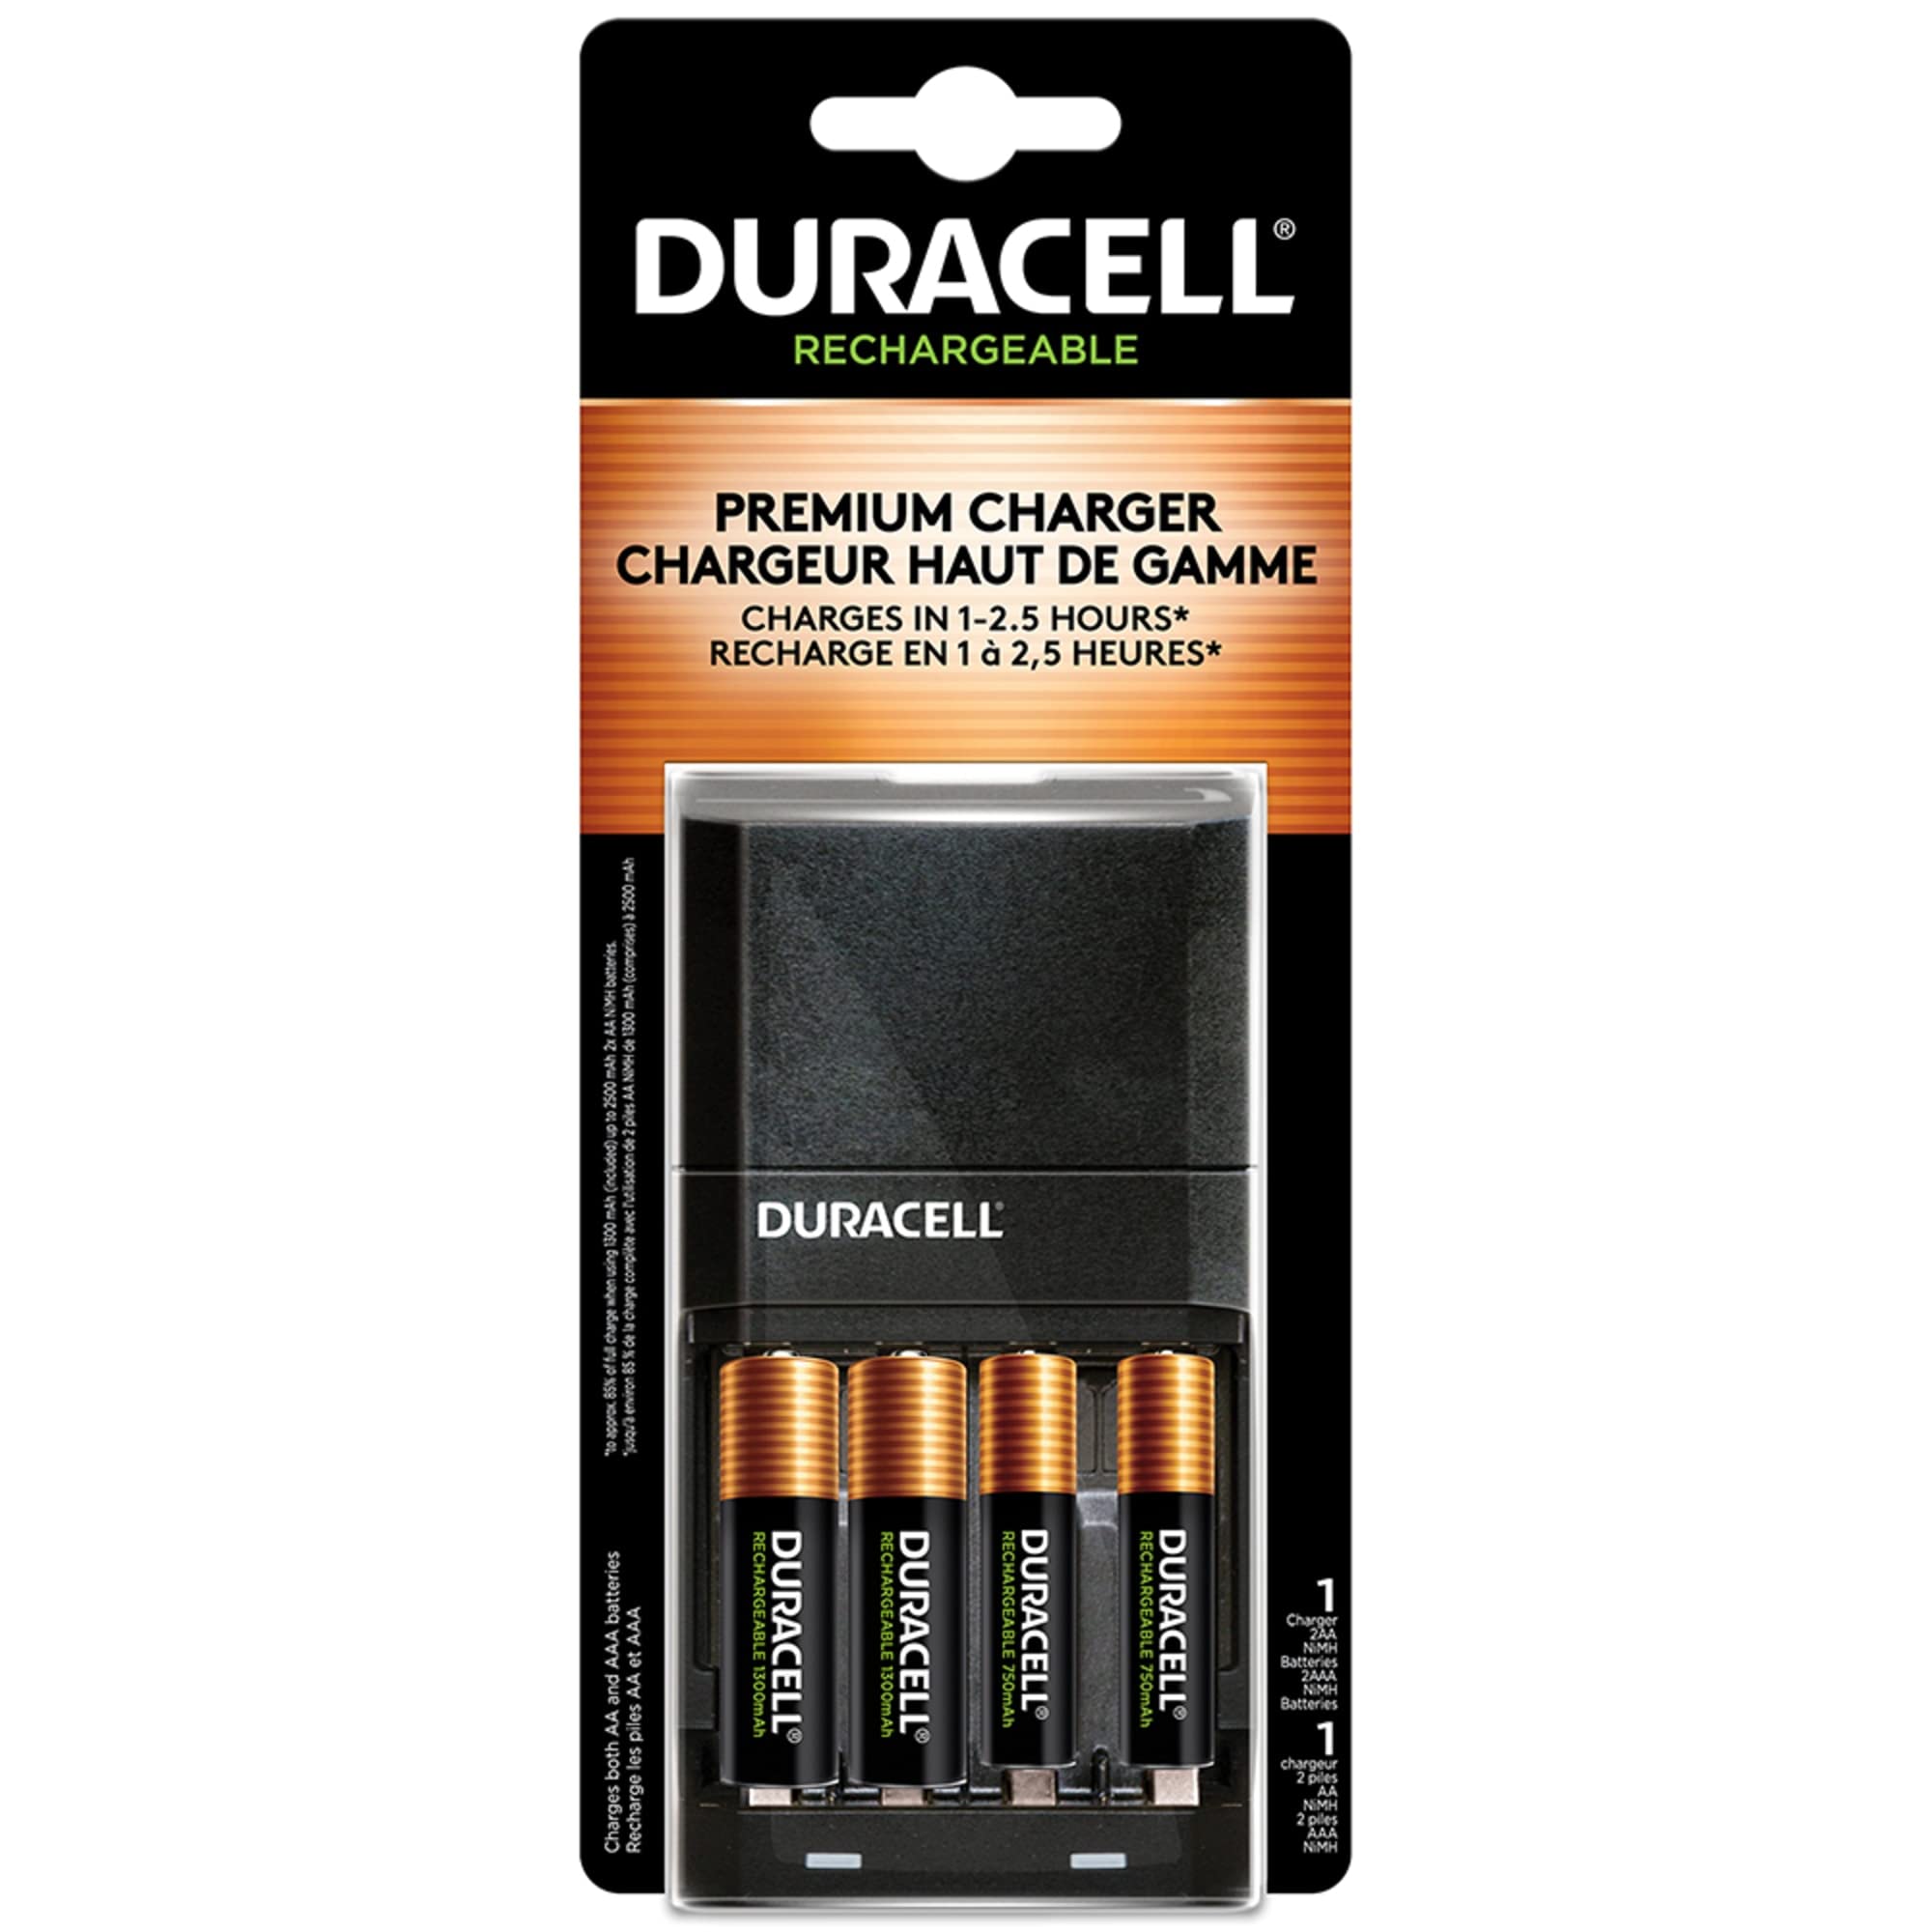 Duracell Ion Speed 4000 Battery Charger for AA and AAA batteries, Includes  2 Pre-Charged AA and 2 AAA Rechargeable Batteries, for Household and  Business Devices